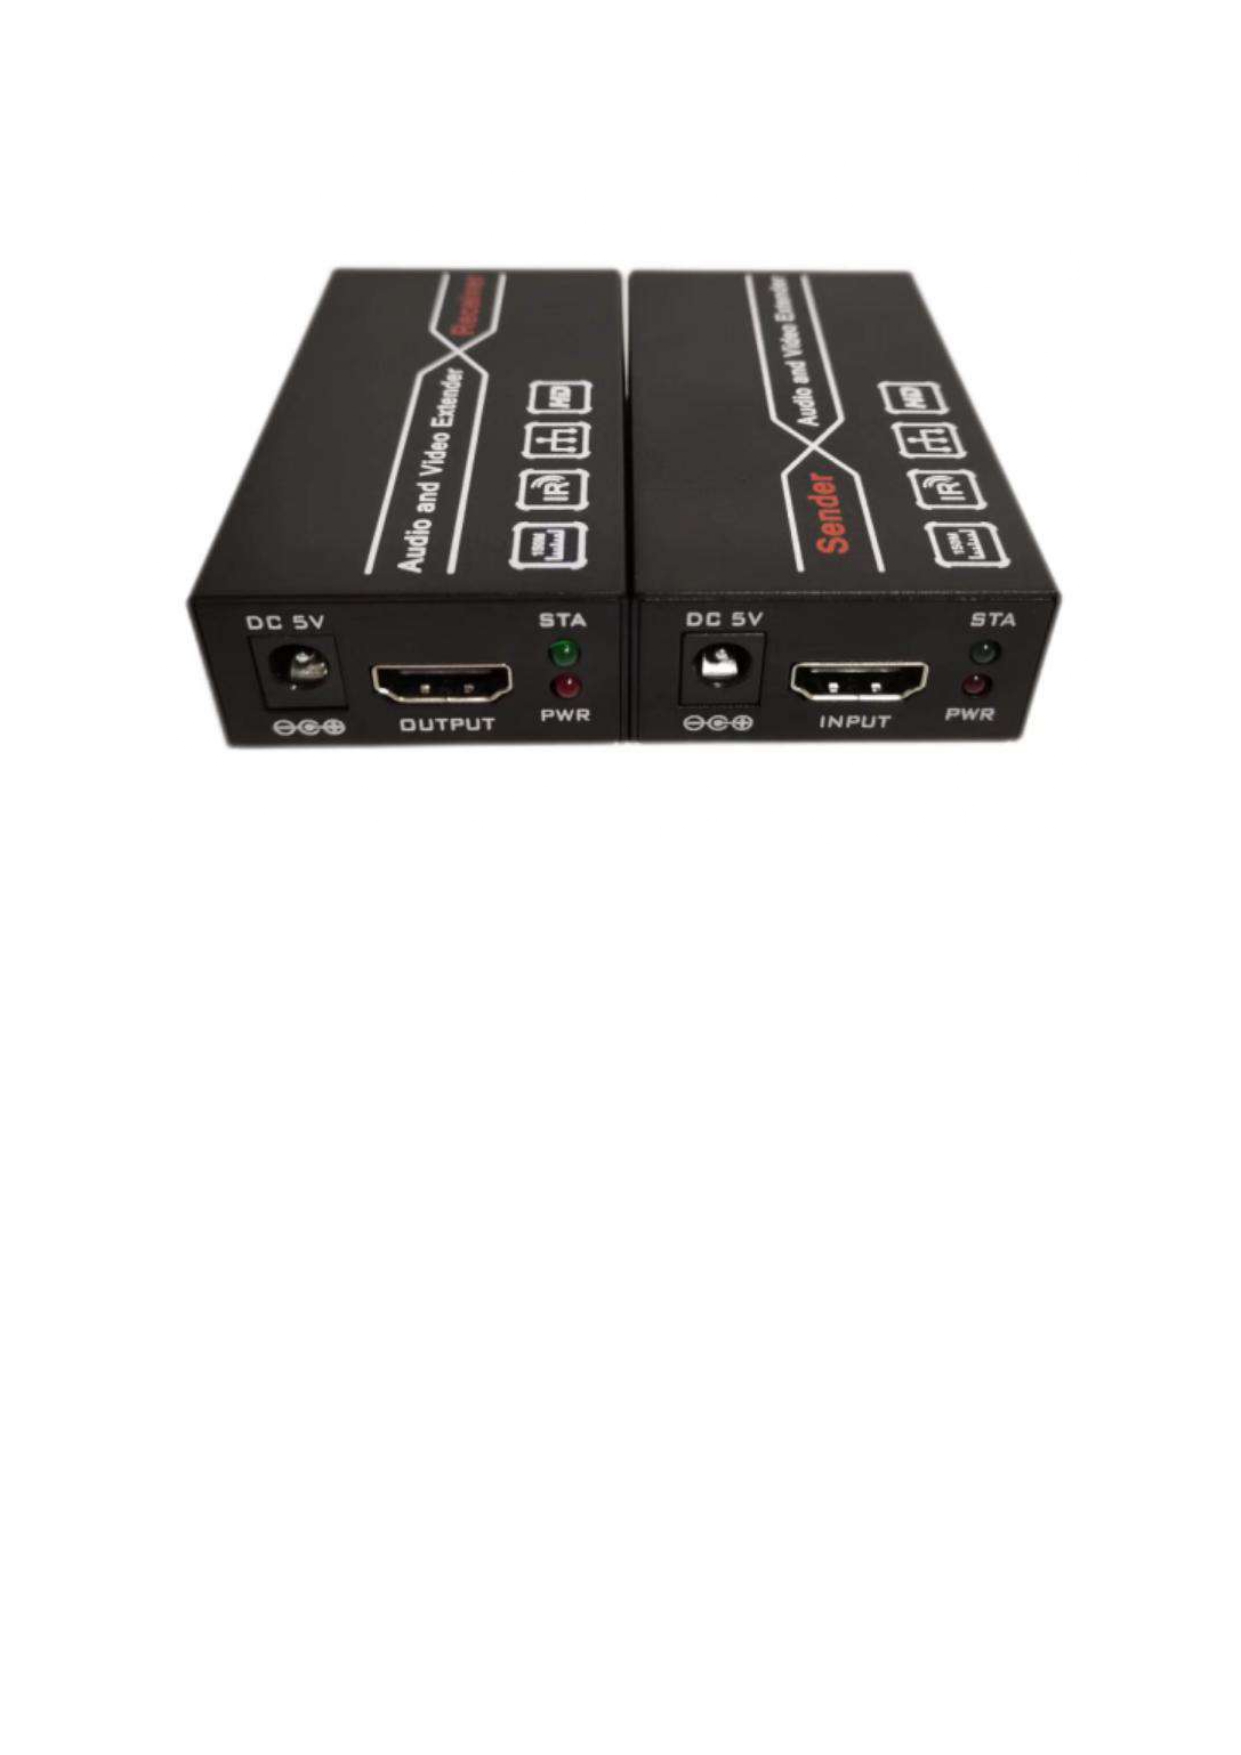 150M HDMI EXTENDER WITH TCP/IP